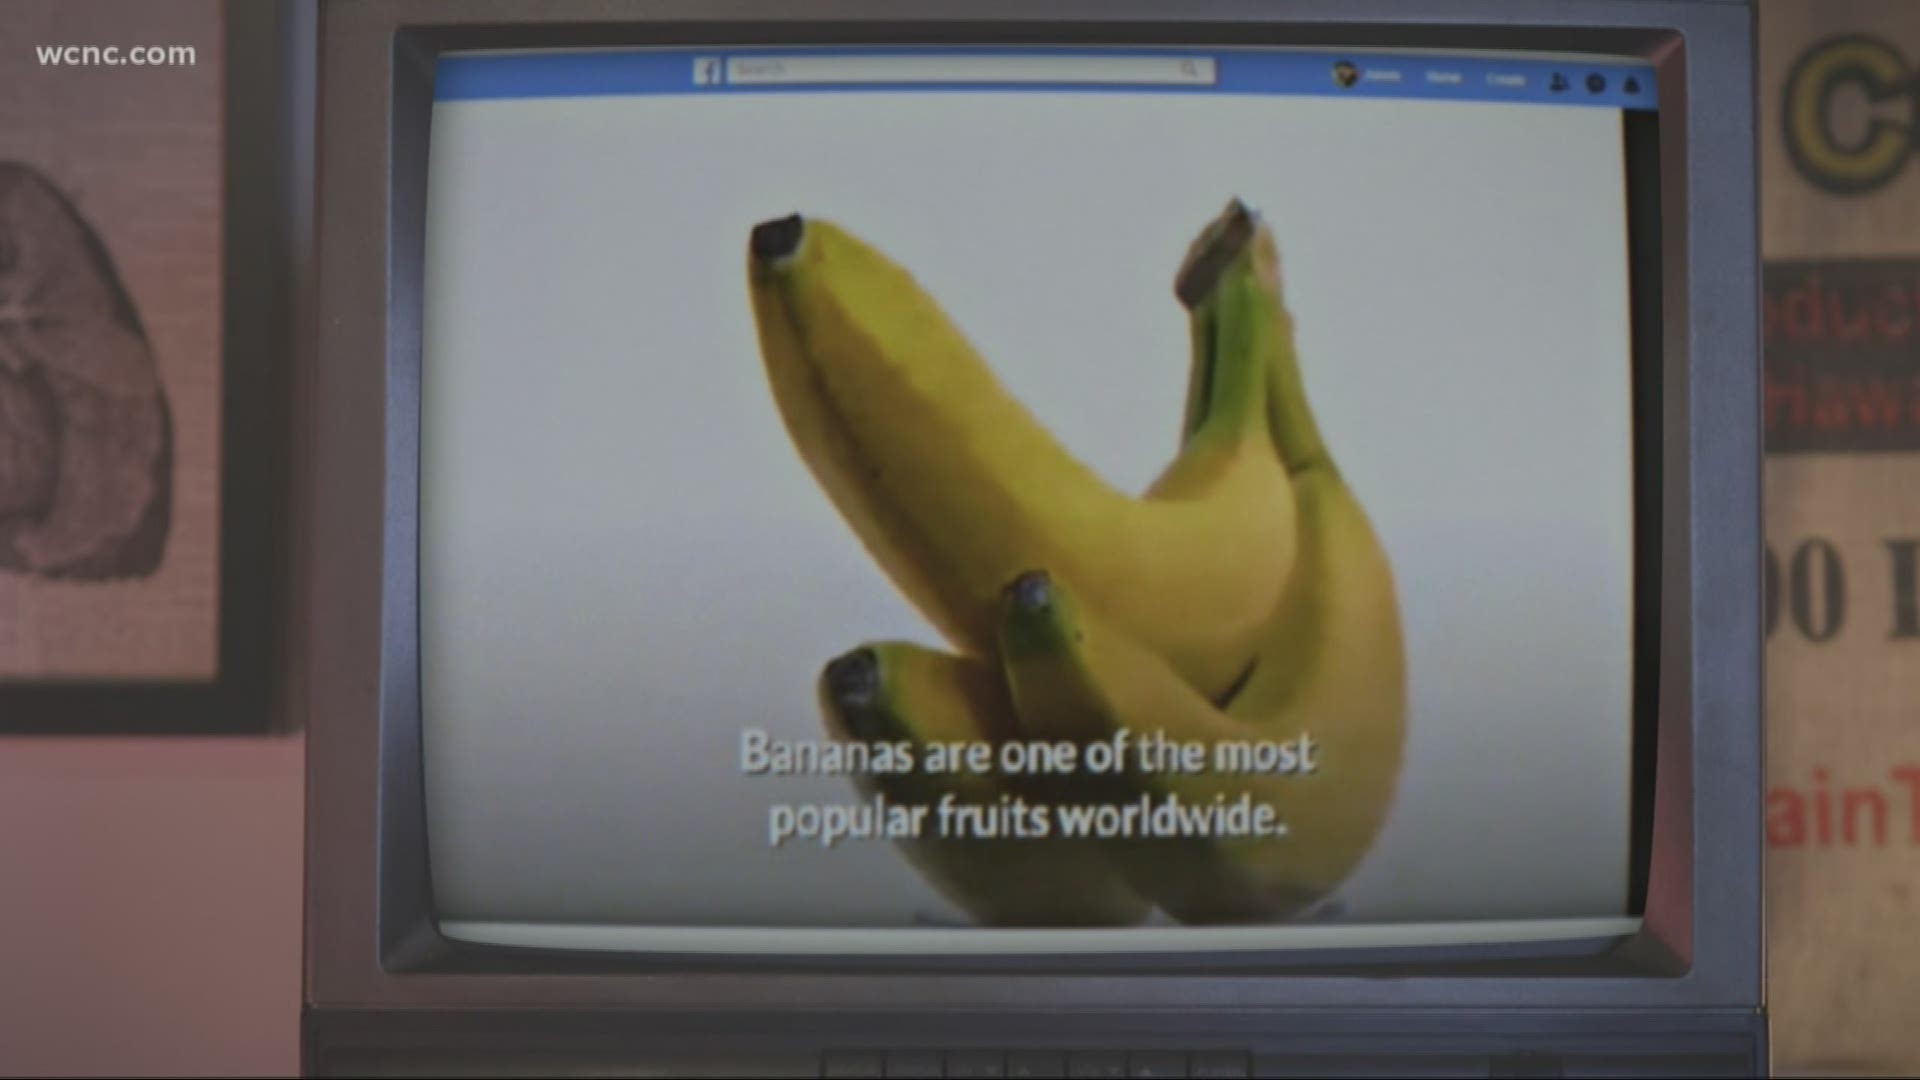 A hoax video circulating social media claims eating a banana each day can boost your immunity to the coronavirus.